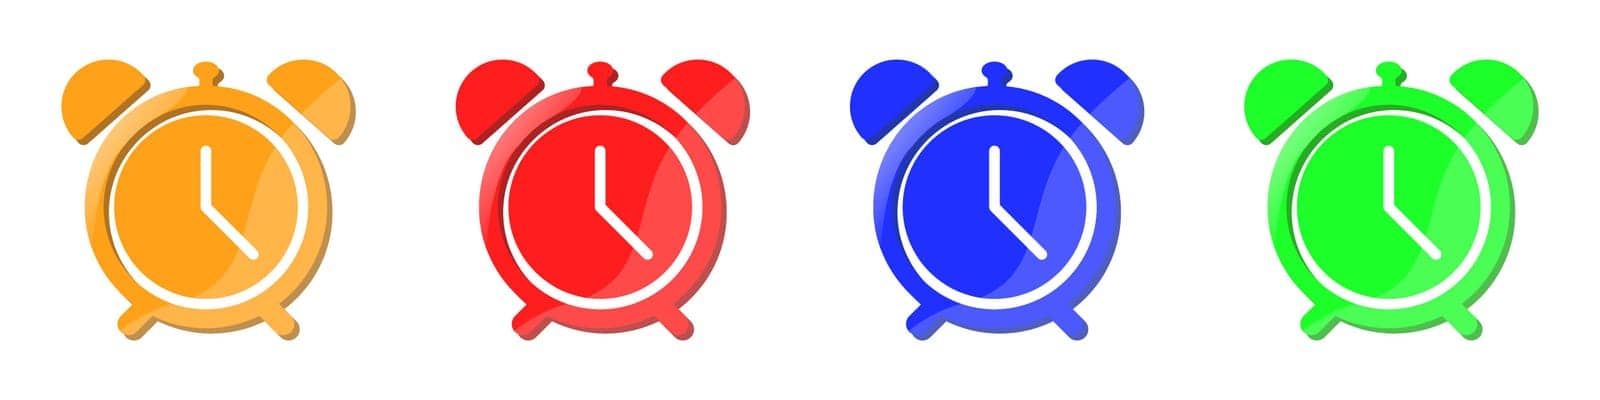 Alarm clocks set of vector icons. Stylish alarm clock vector. Time concept icons of colored clocks. Advertising alarms vector for web design. by Moreidea